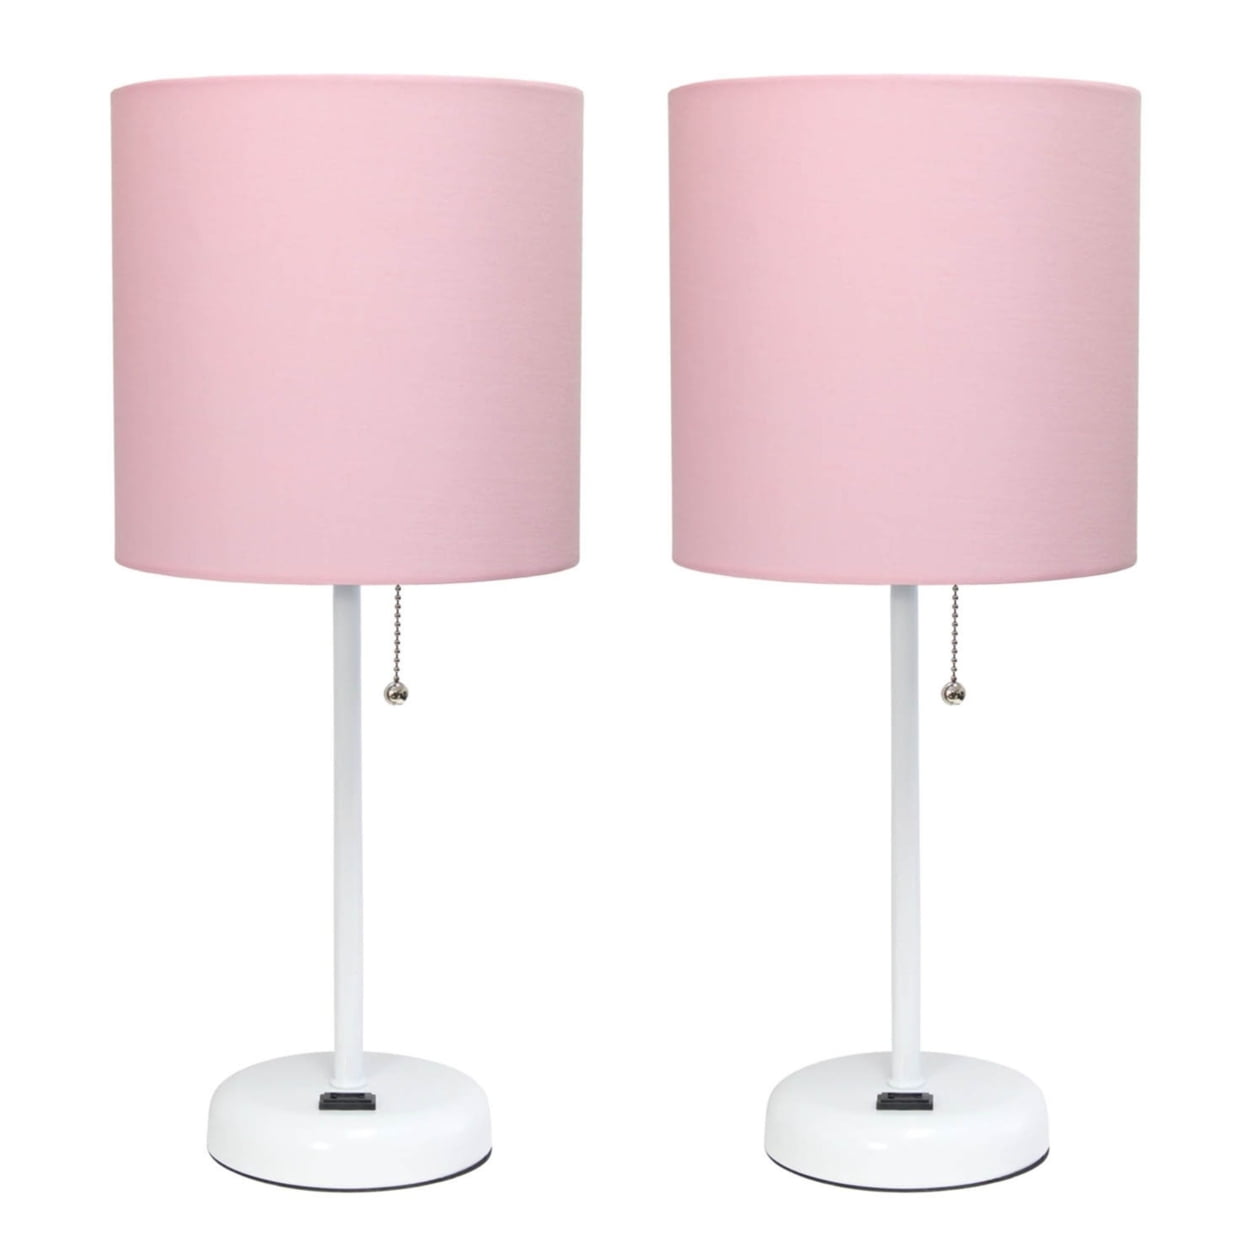 Lc2001-pow-2pk White Stick Table Lamp With Charging Outlet & Fabric Shade, Pink - Set Of 2